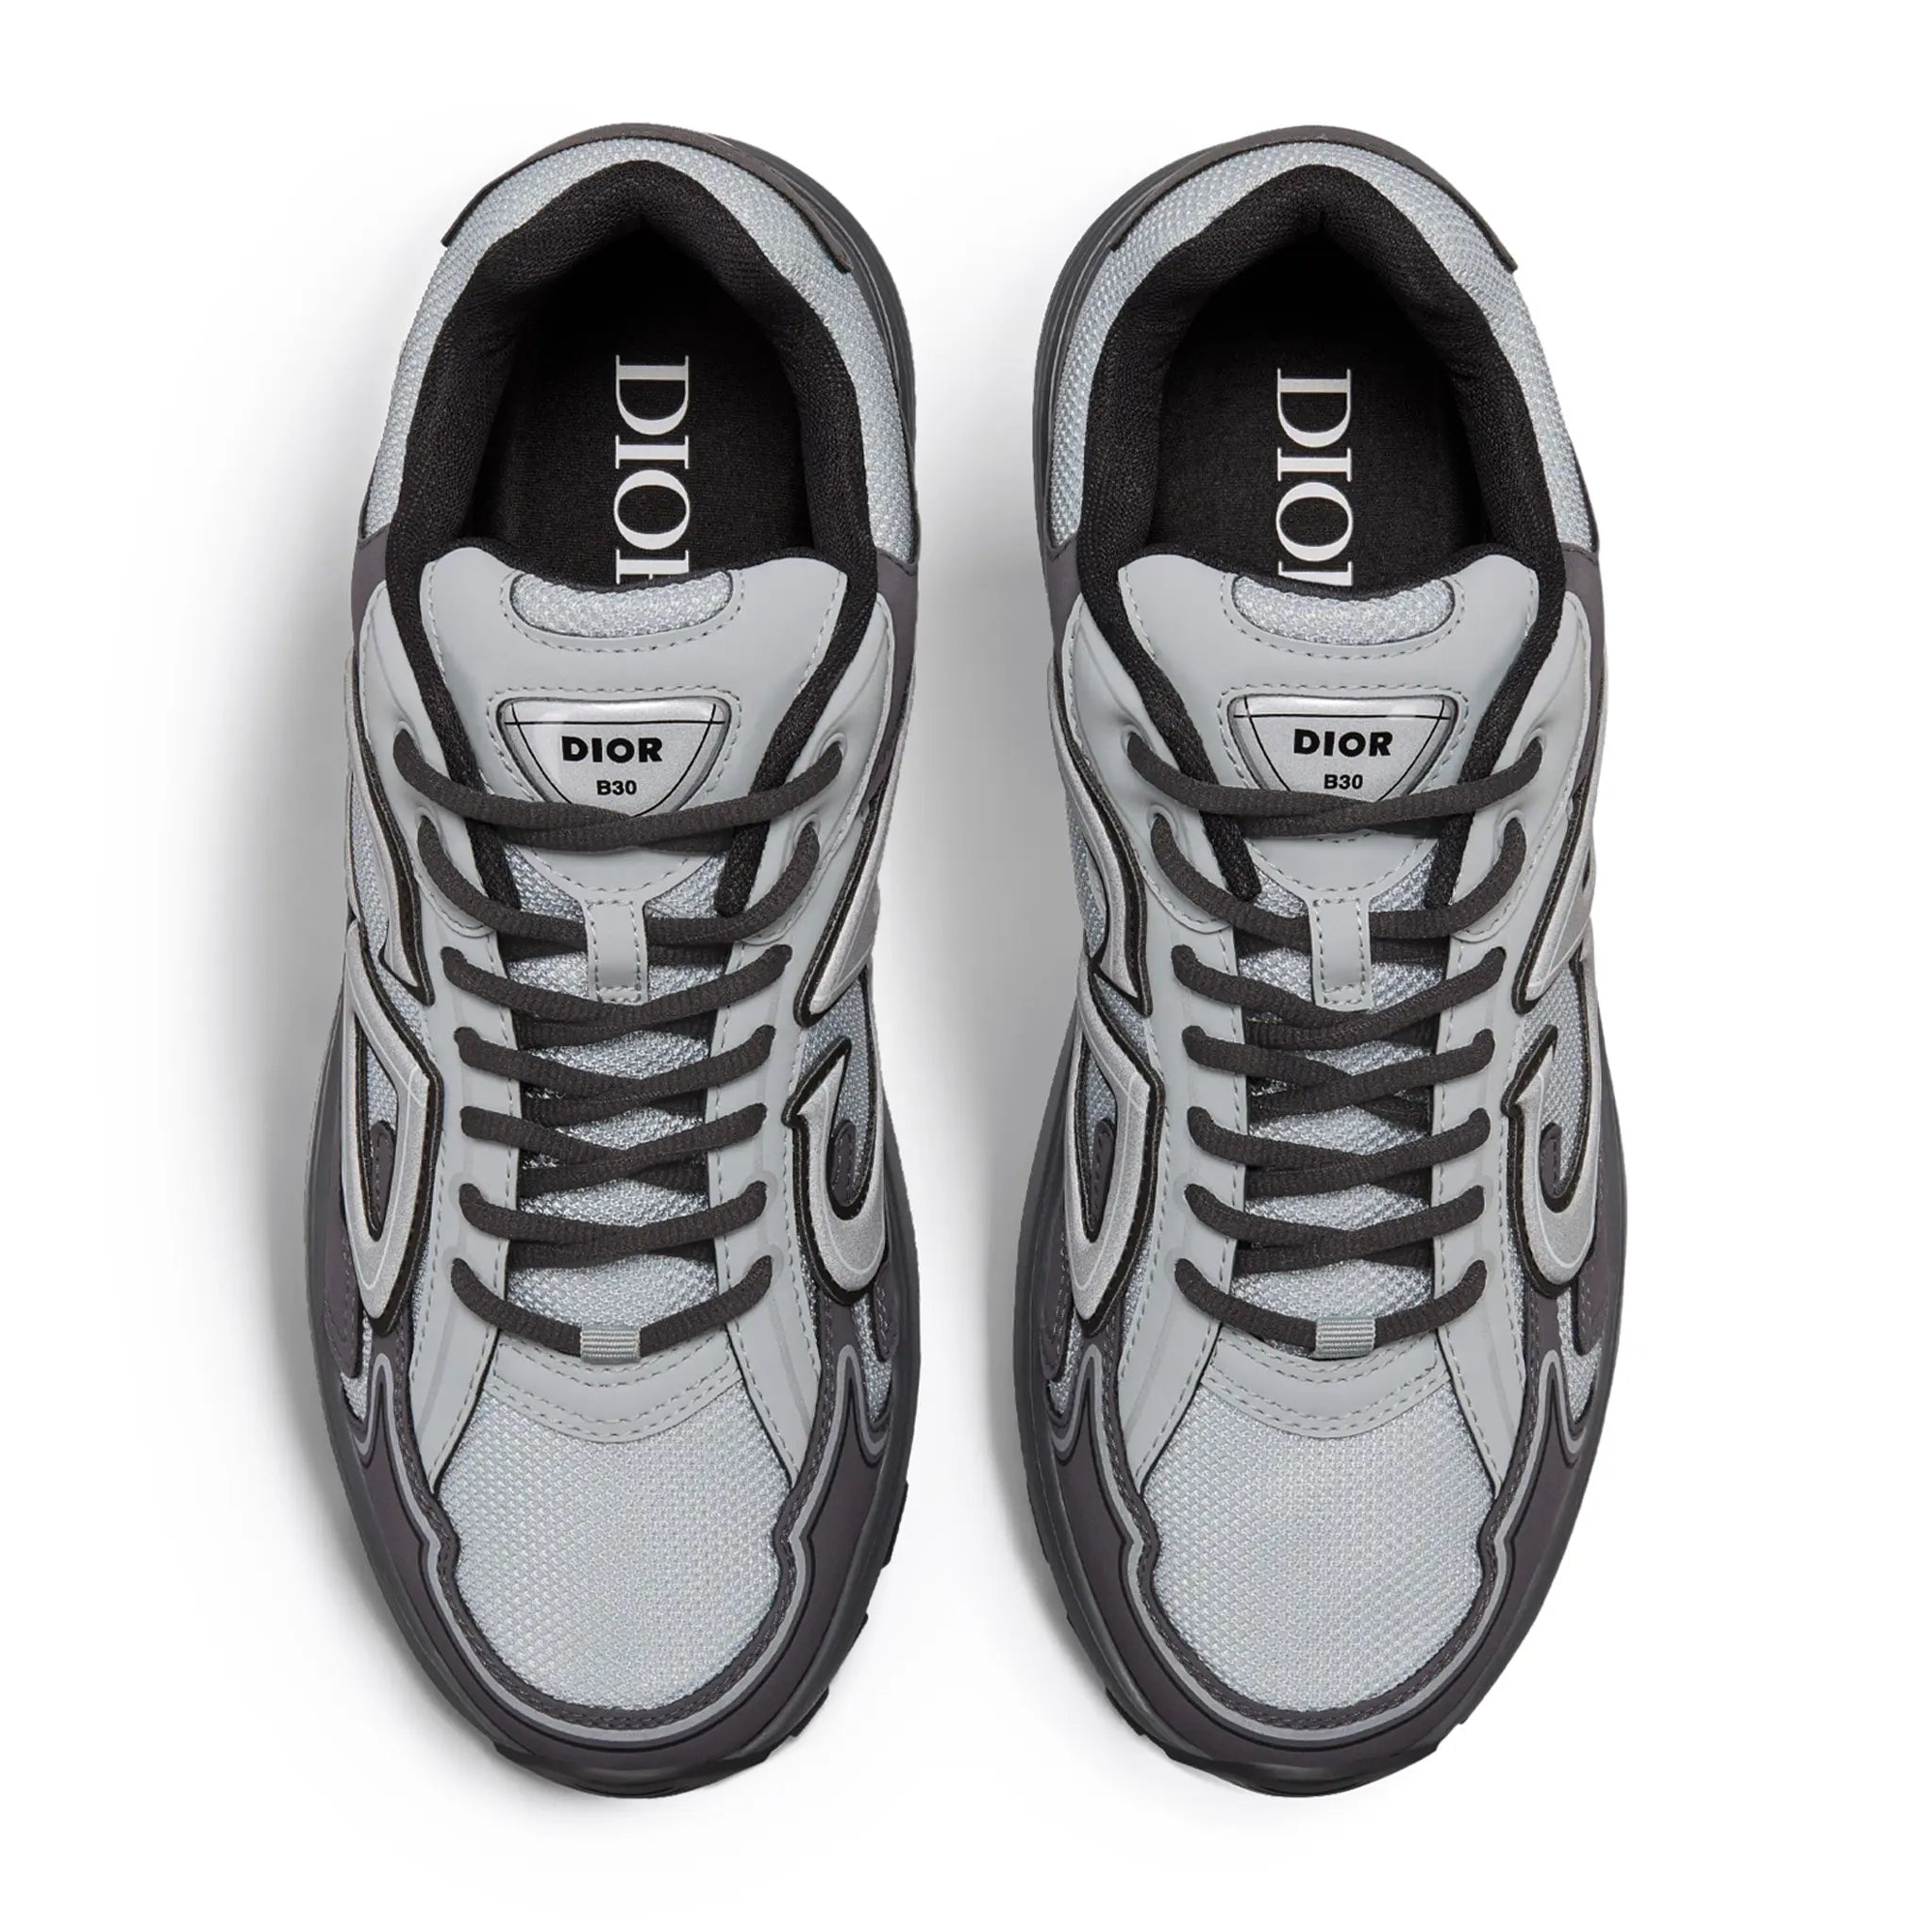 Image of Dior B30 Technical Grey Anthracite Trainer